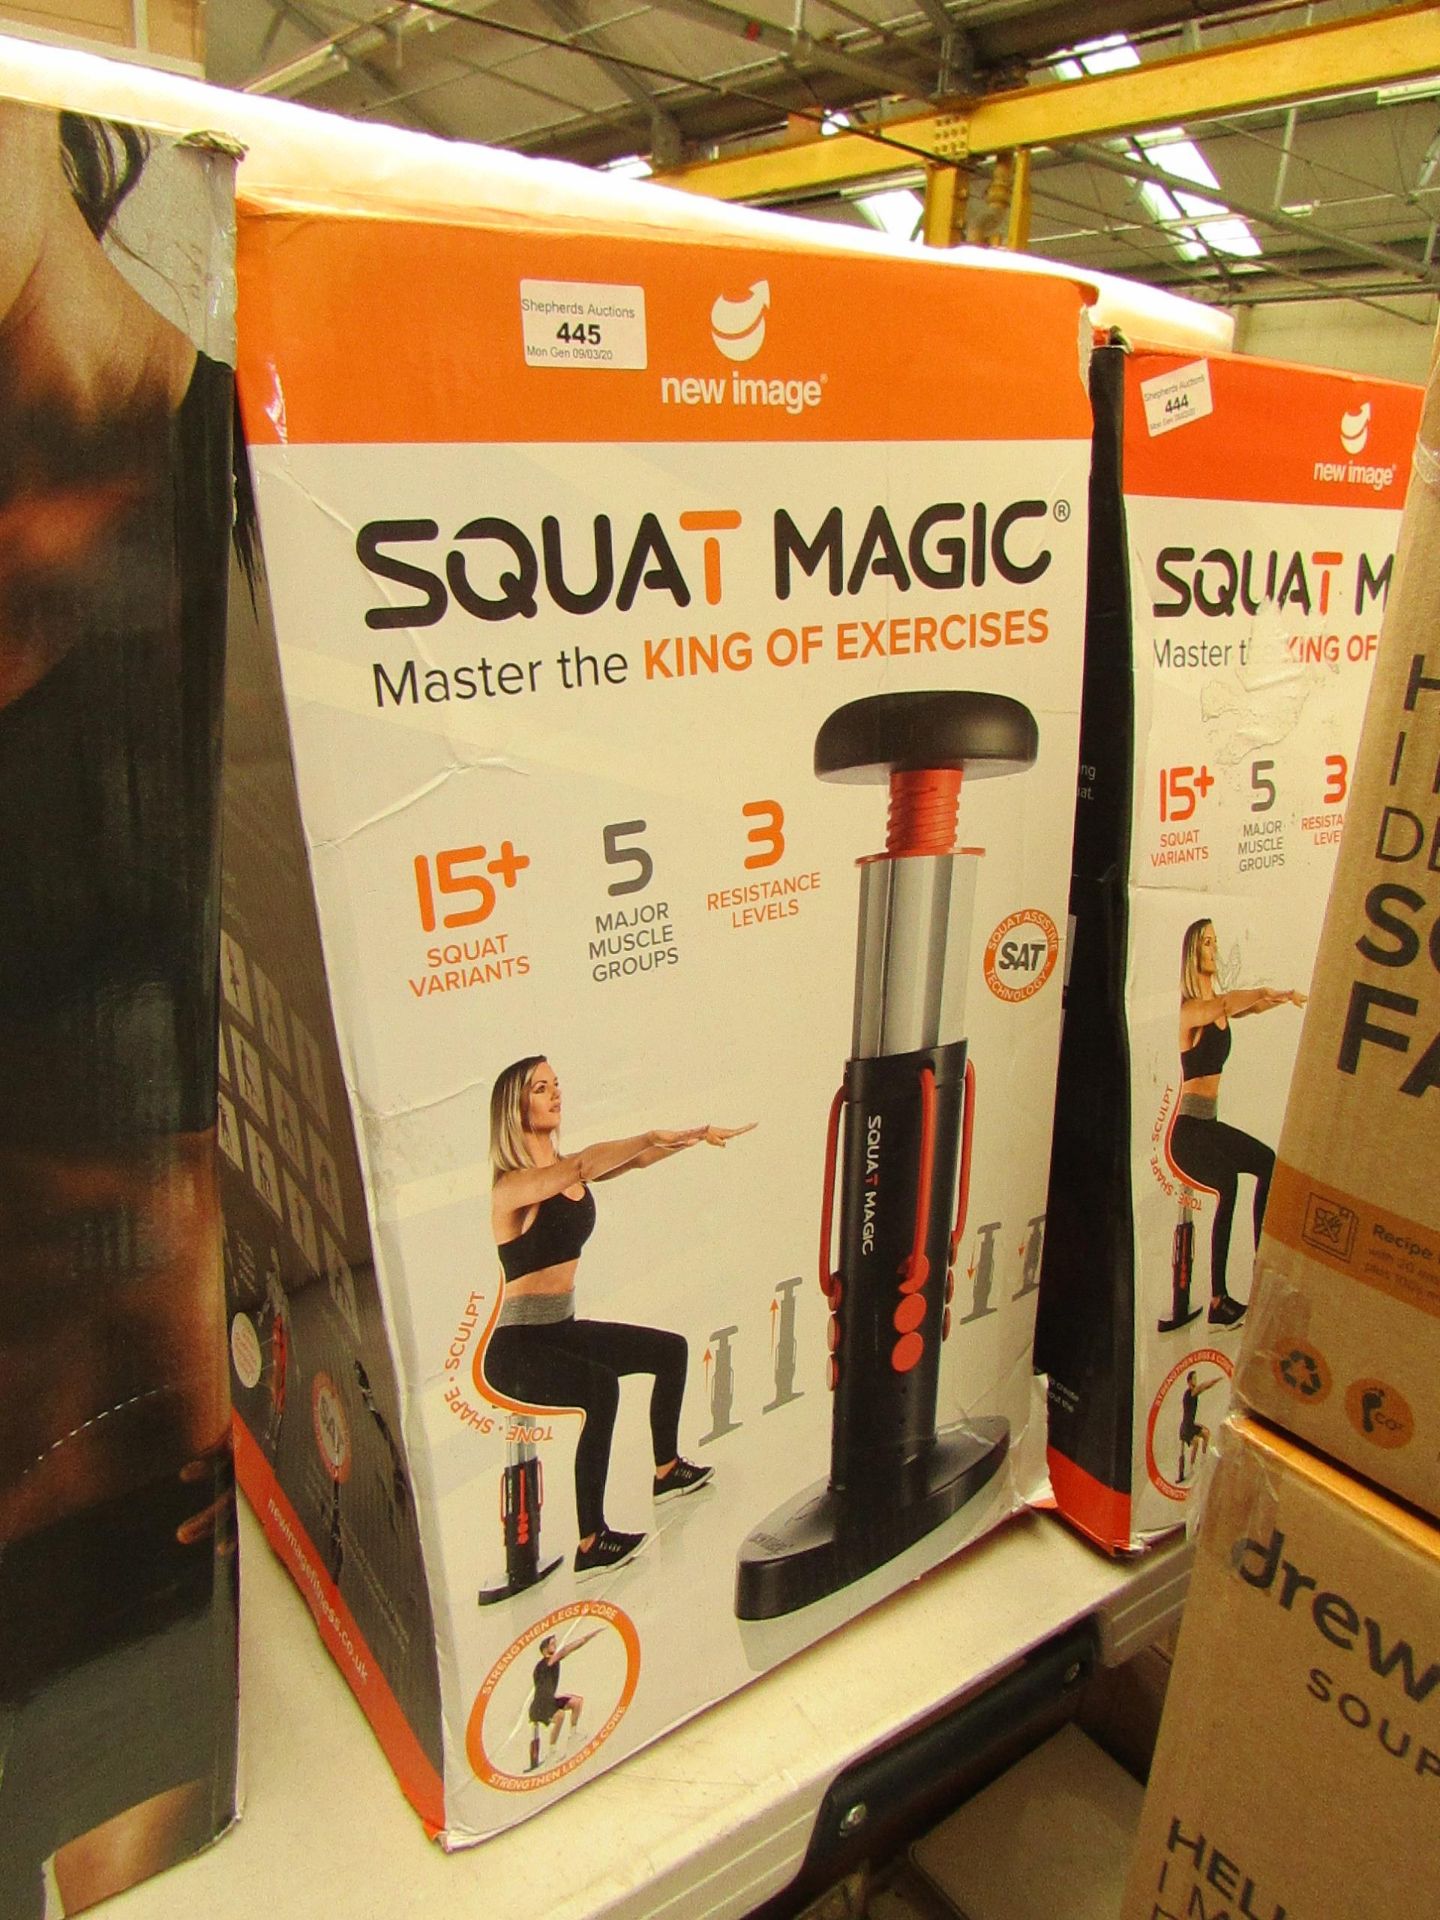 | 1x | SQUAT MAGIC | UNCHECKED AND BOXED | NO ONLINE RE-SALE | SKU C5060191467513 | RRP £49:99 |